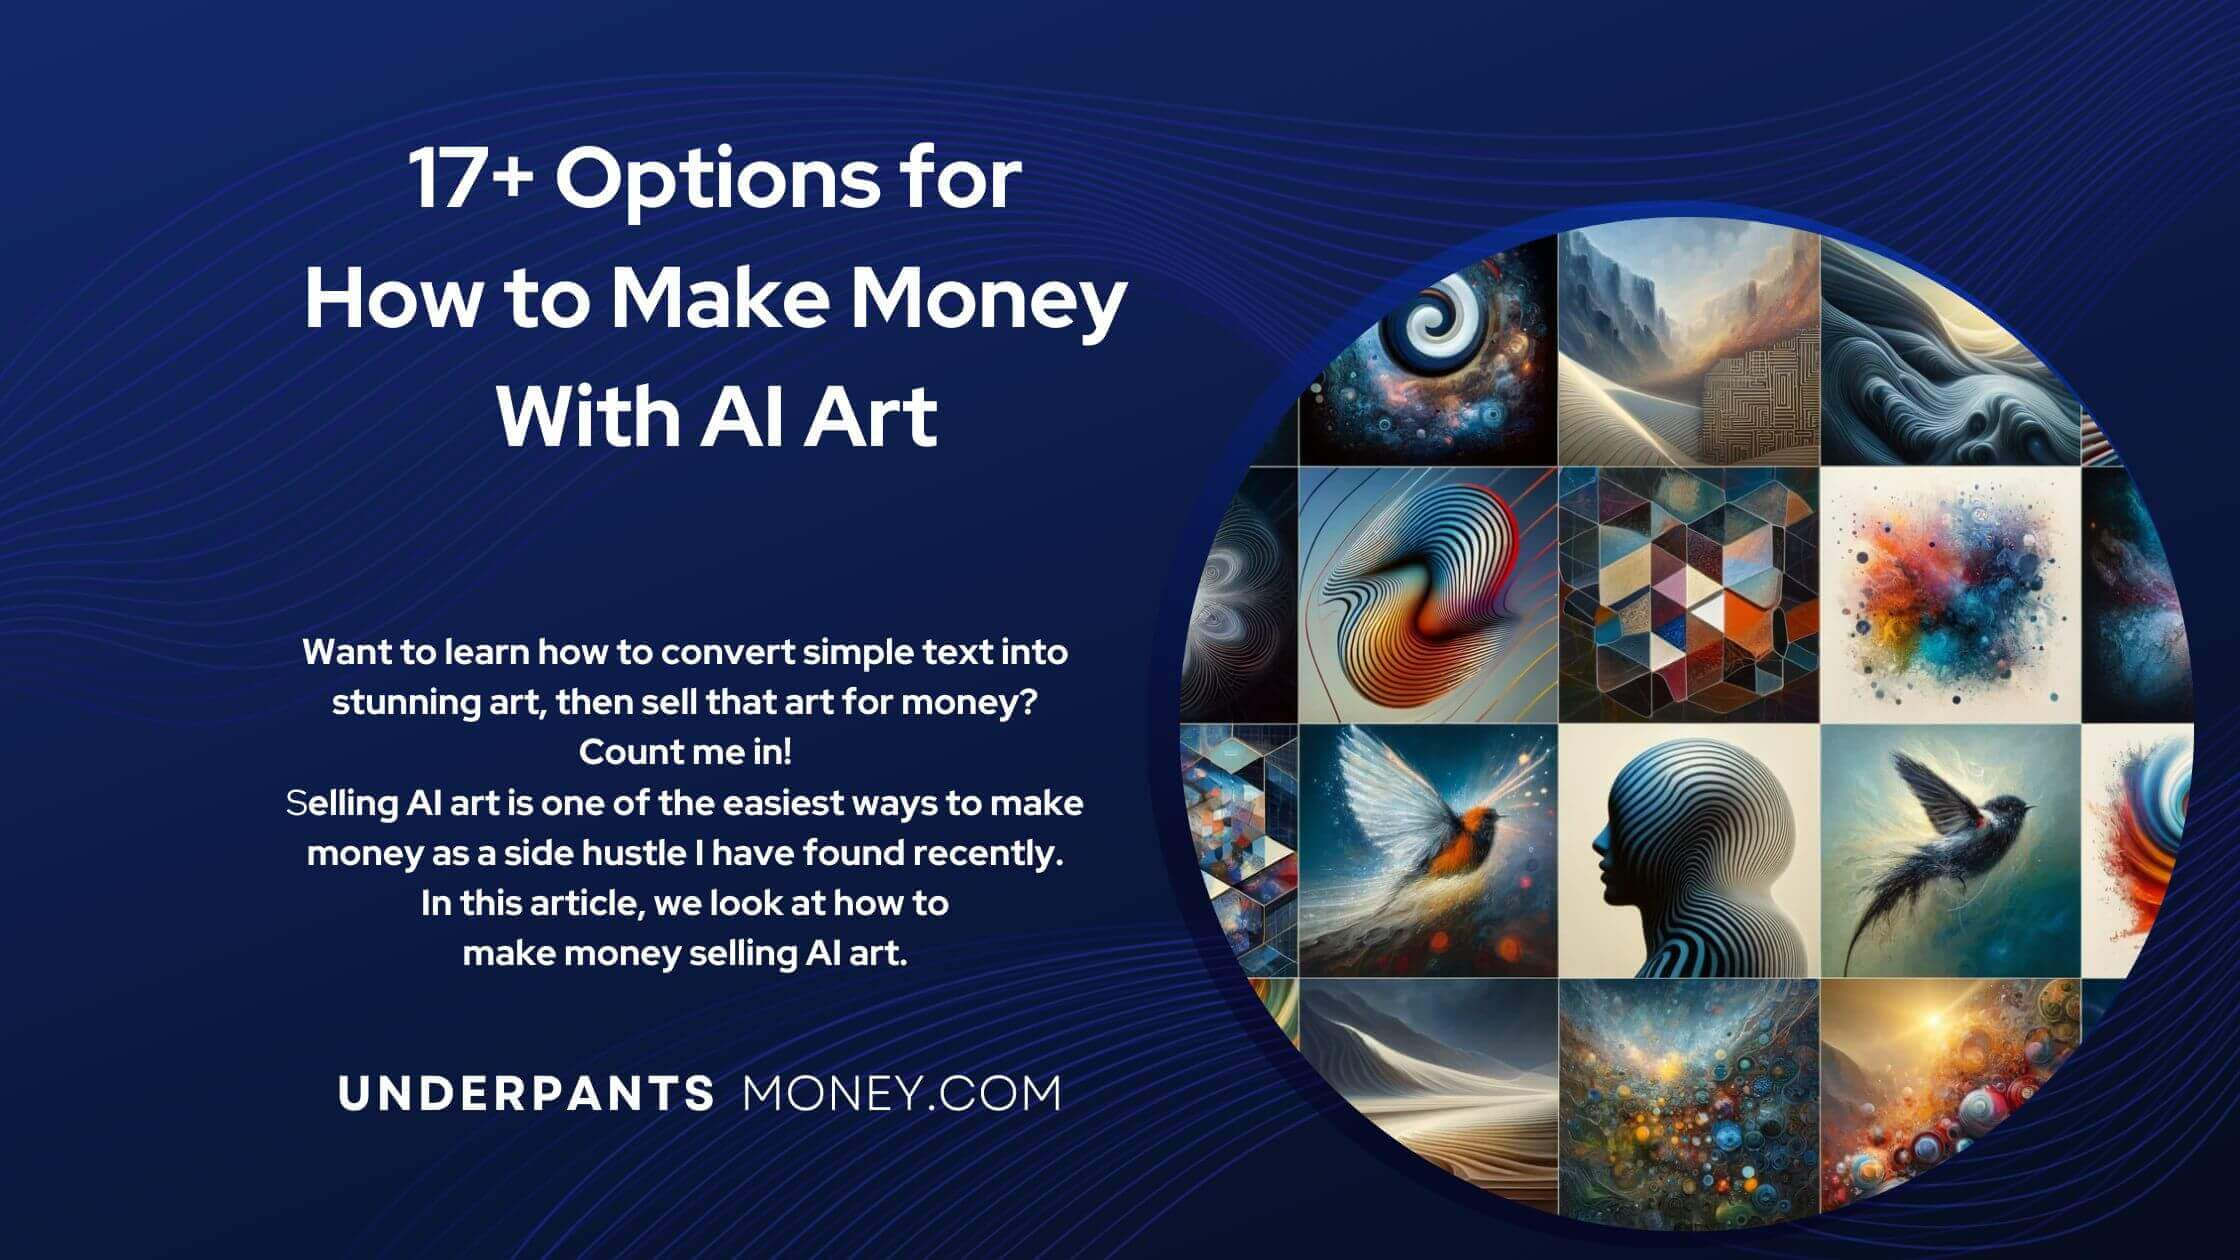 how to make money with ai art title and subtext on blue with image of many digital art pieces to the right